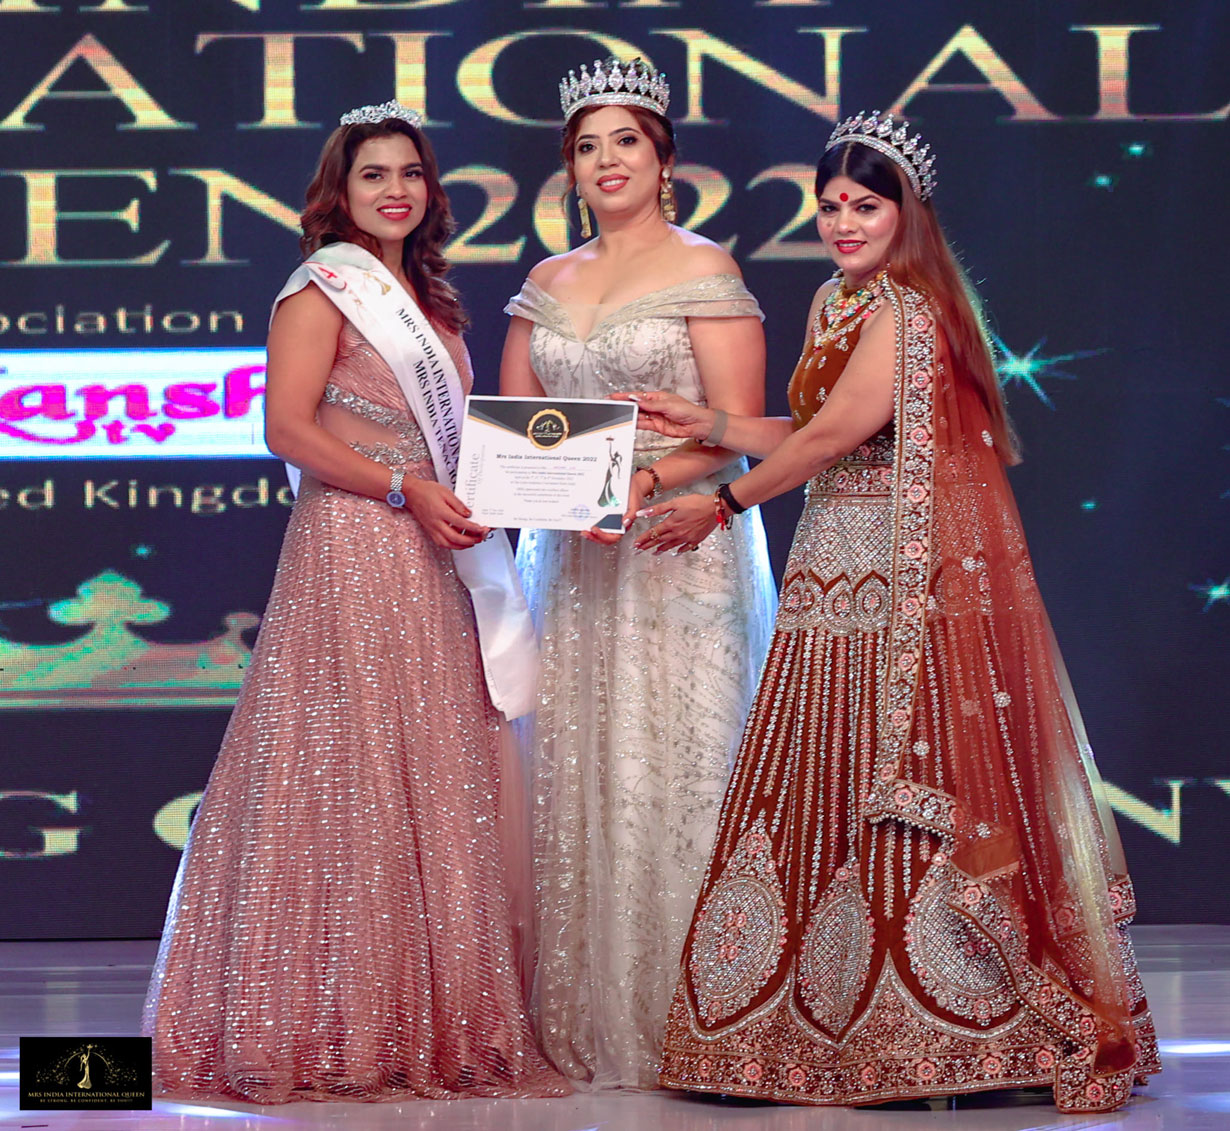 CROWNING MOMENTS - MRS INDIA INTERNATIONAL QUEEN